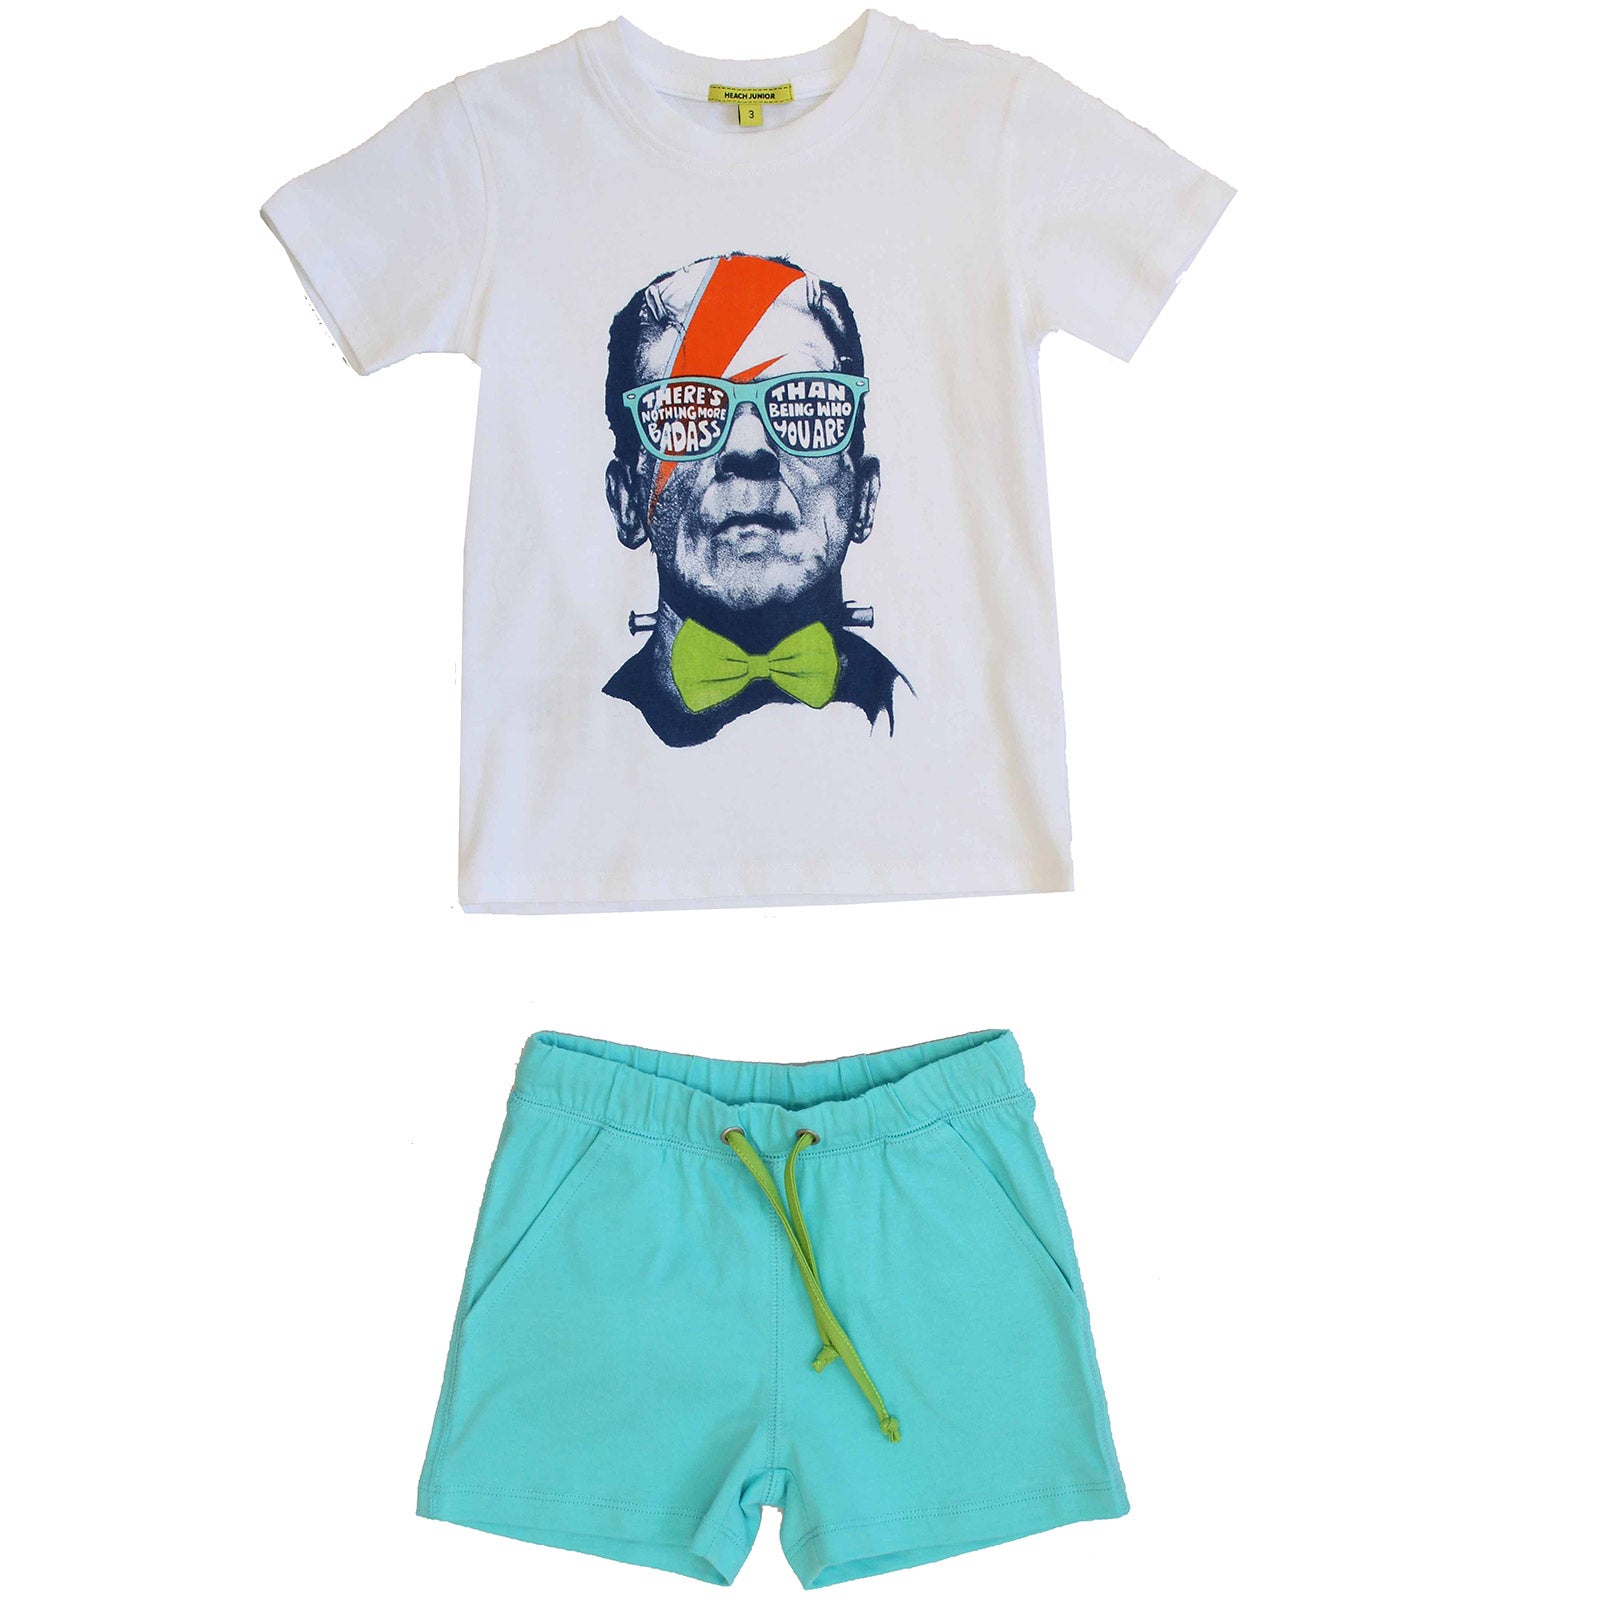 
  Two-piece set from the Silvian Heach children's clothing line available in several colour vari...